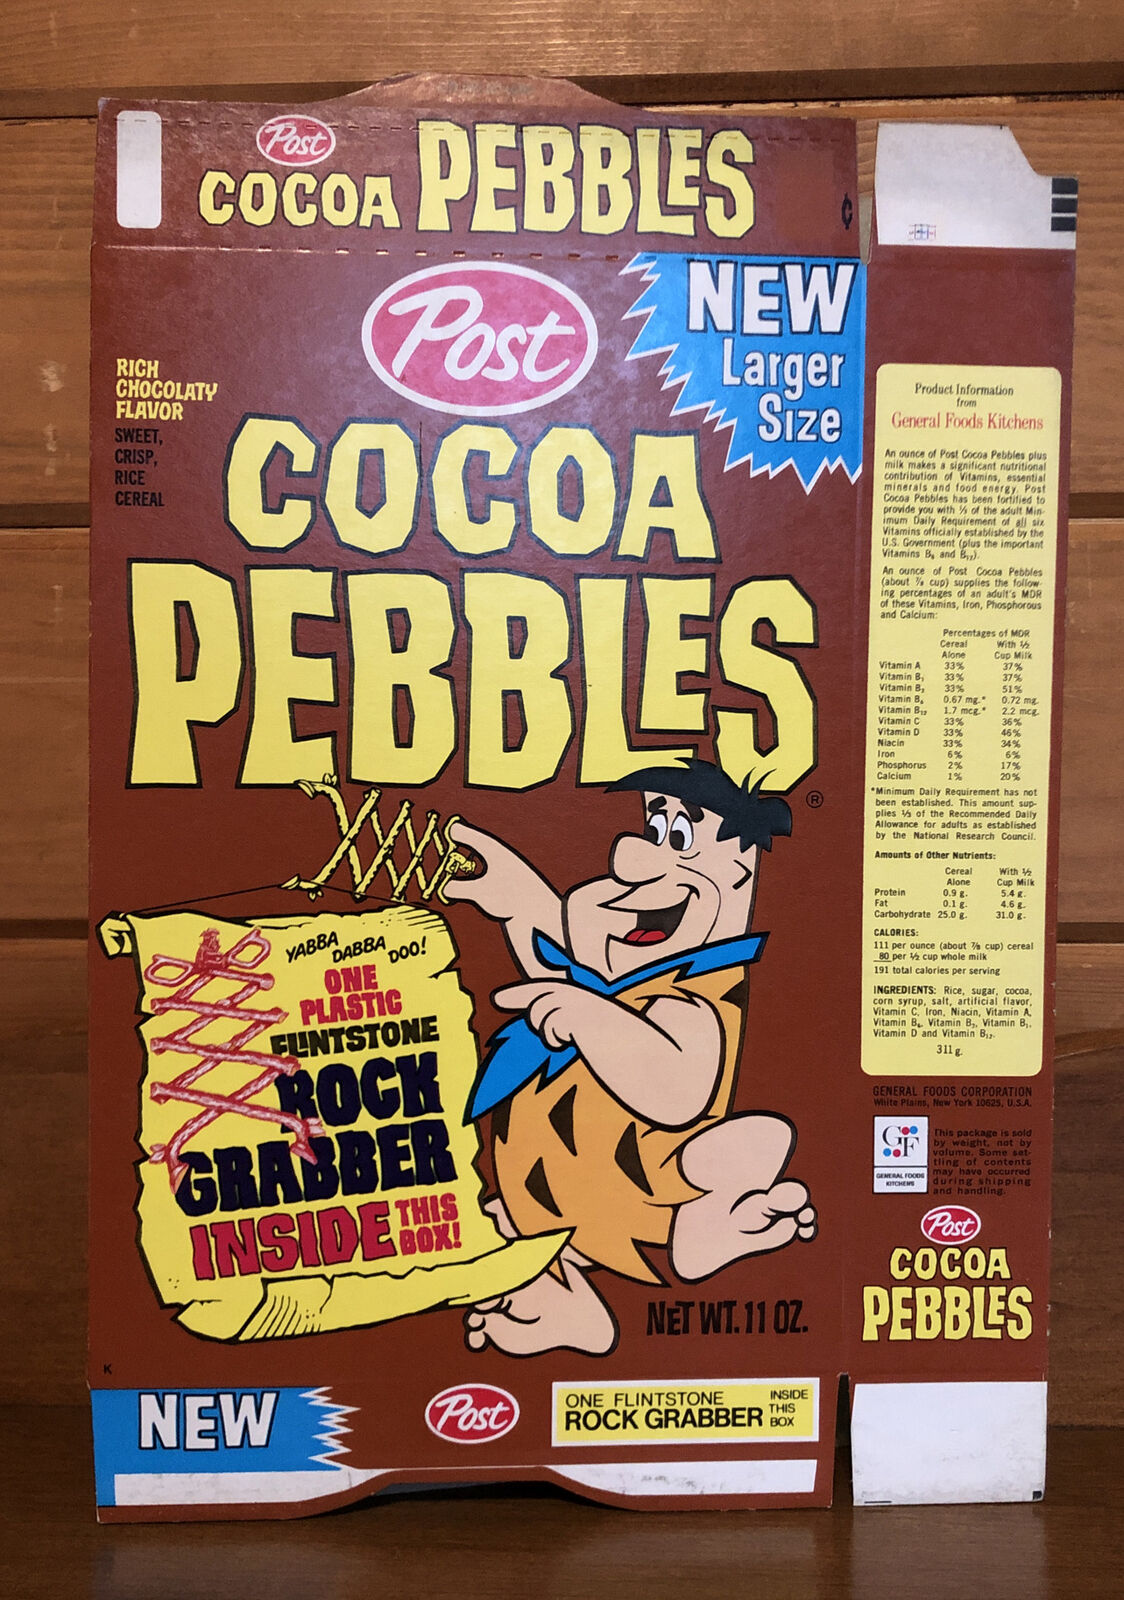 1974 Post Cereal Cocoa Pebbles Cereal Box General Foods Kitchens Rock Grabber